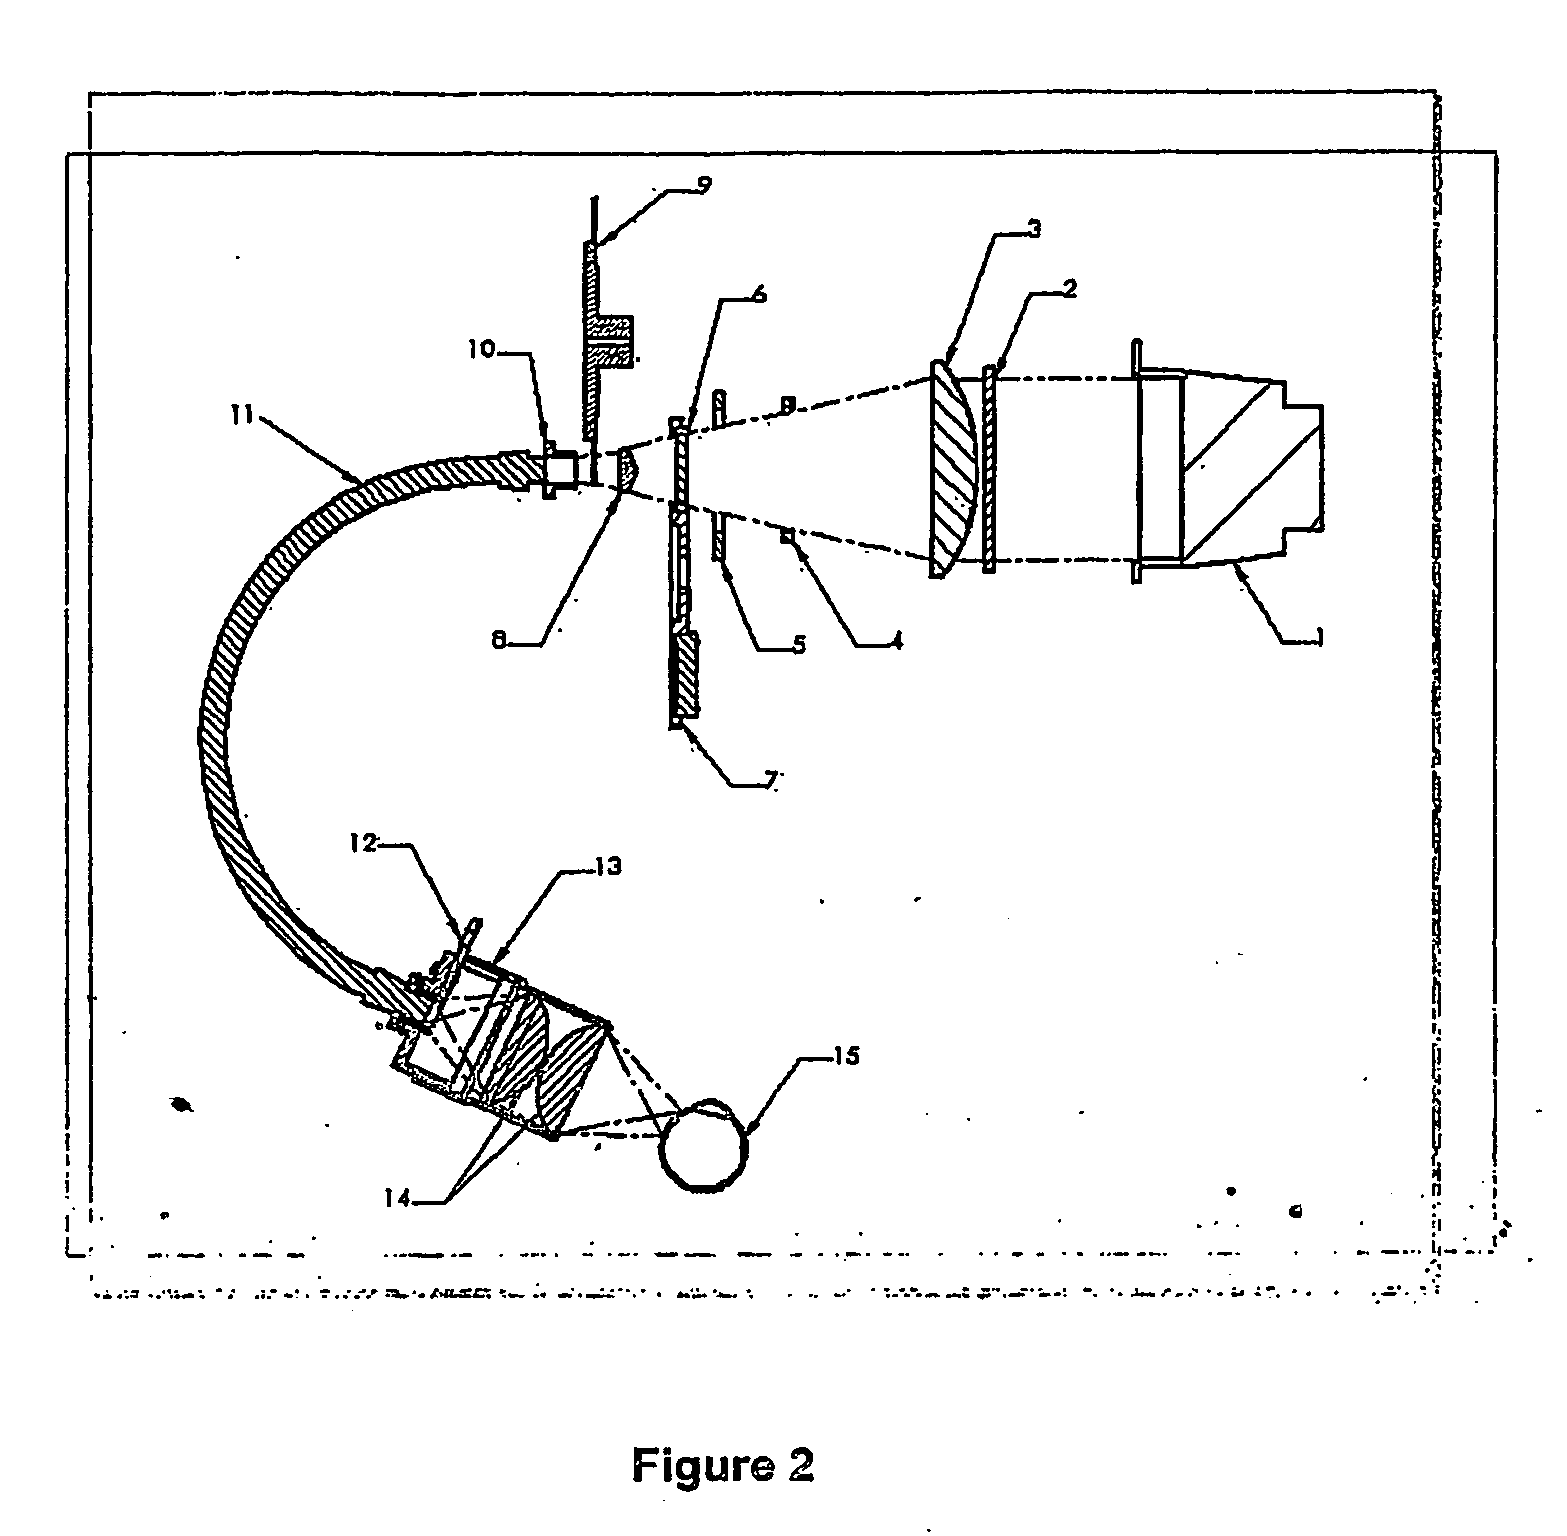 Transcleral opthalmic illumination method and system